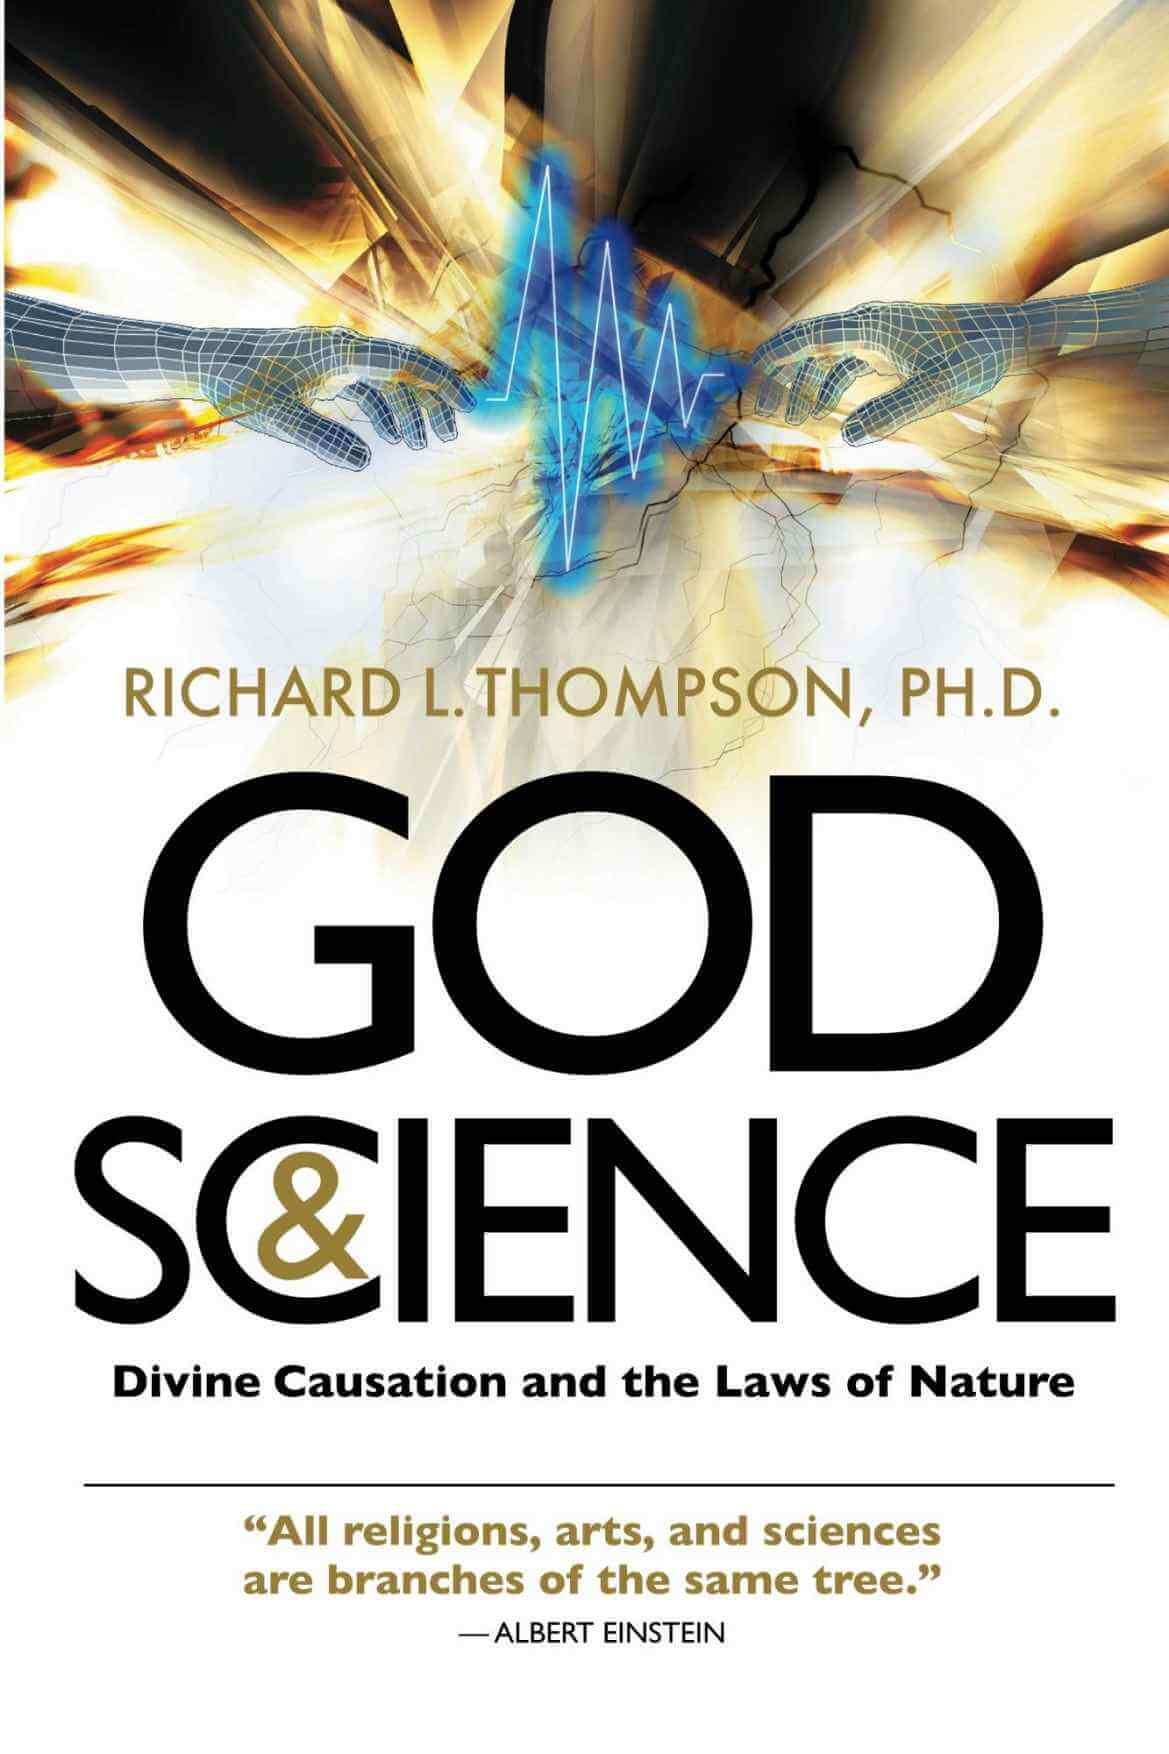 God and Science - Divine Causation and the Laws of Nature